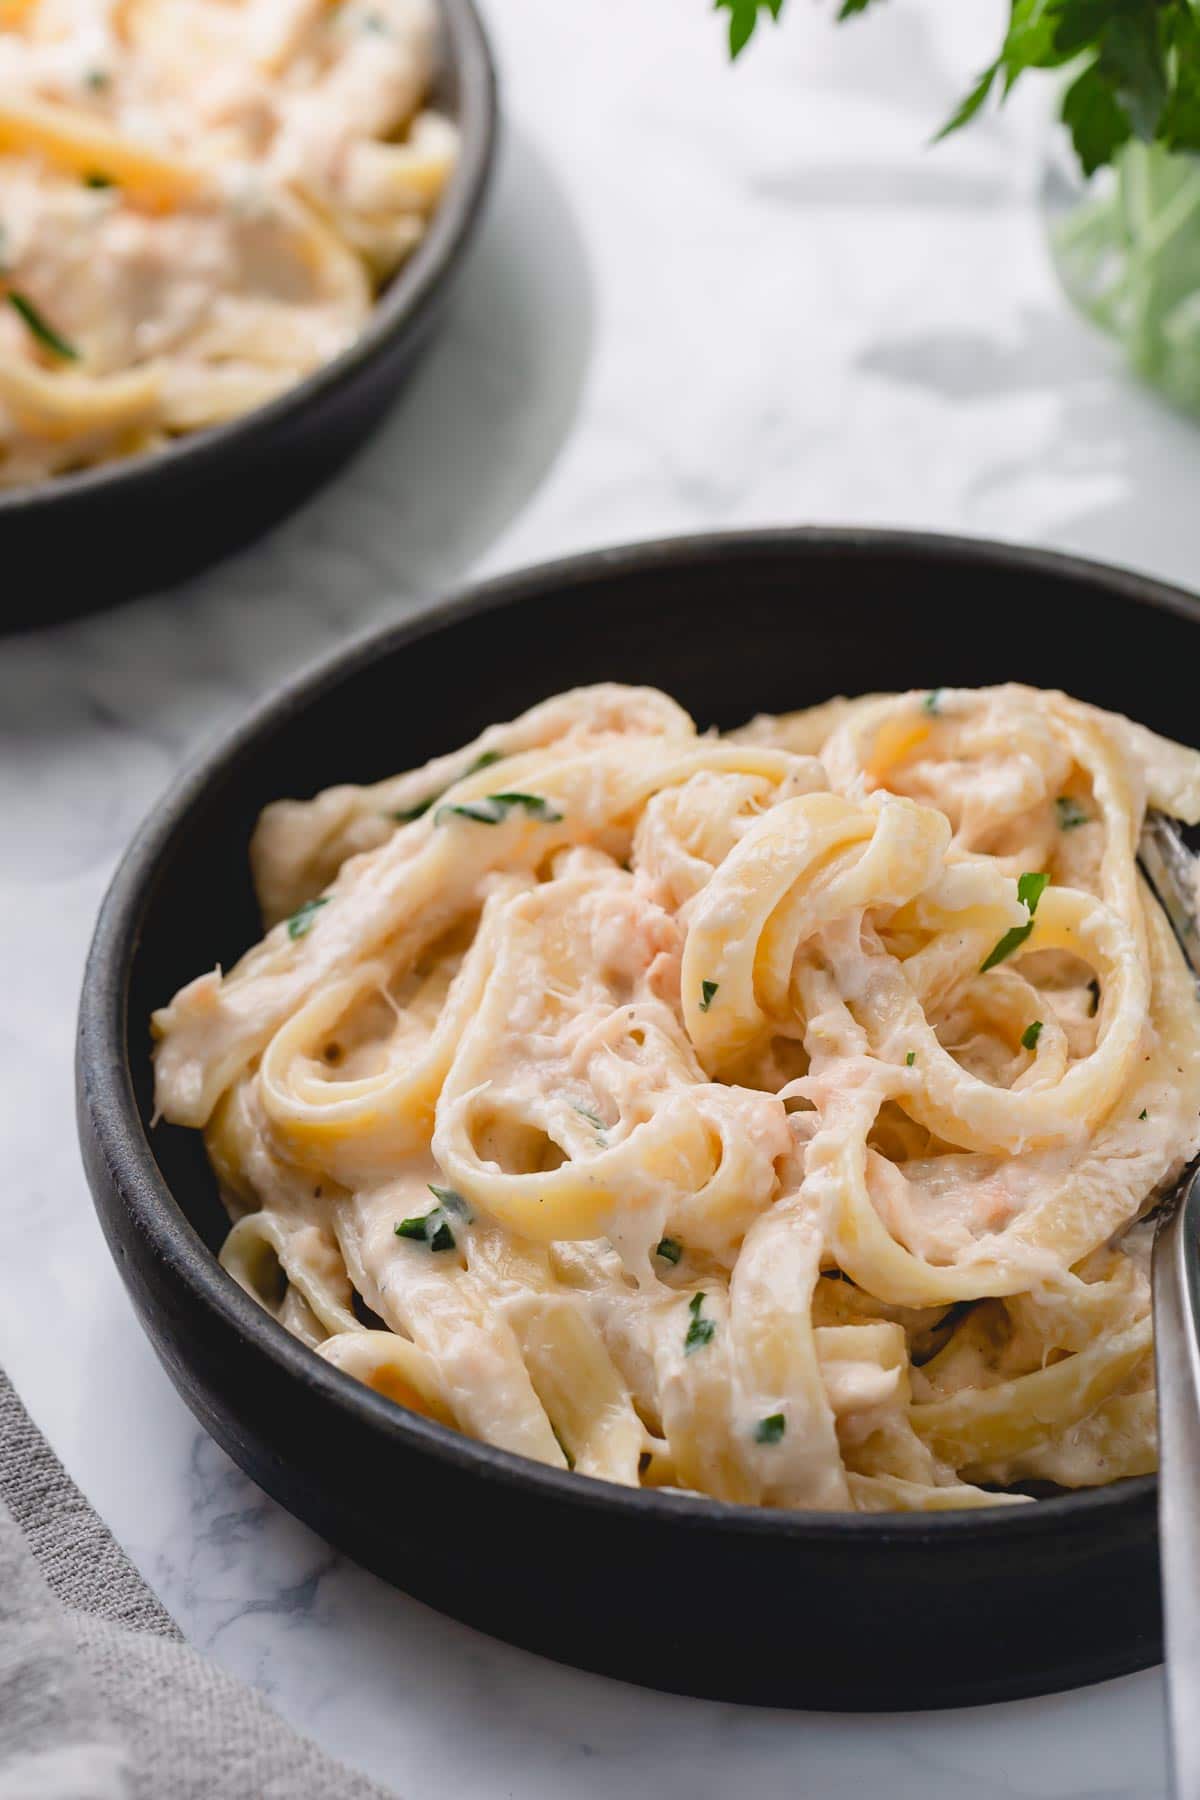 A plate of creamy pasta with smoked salmon.